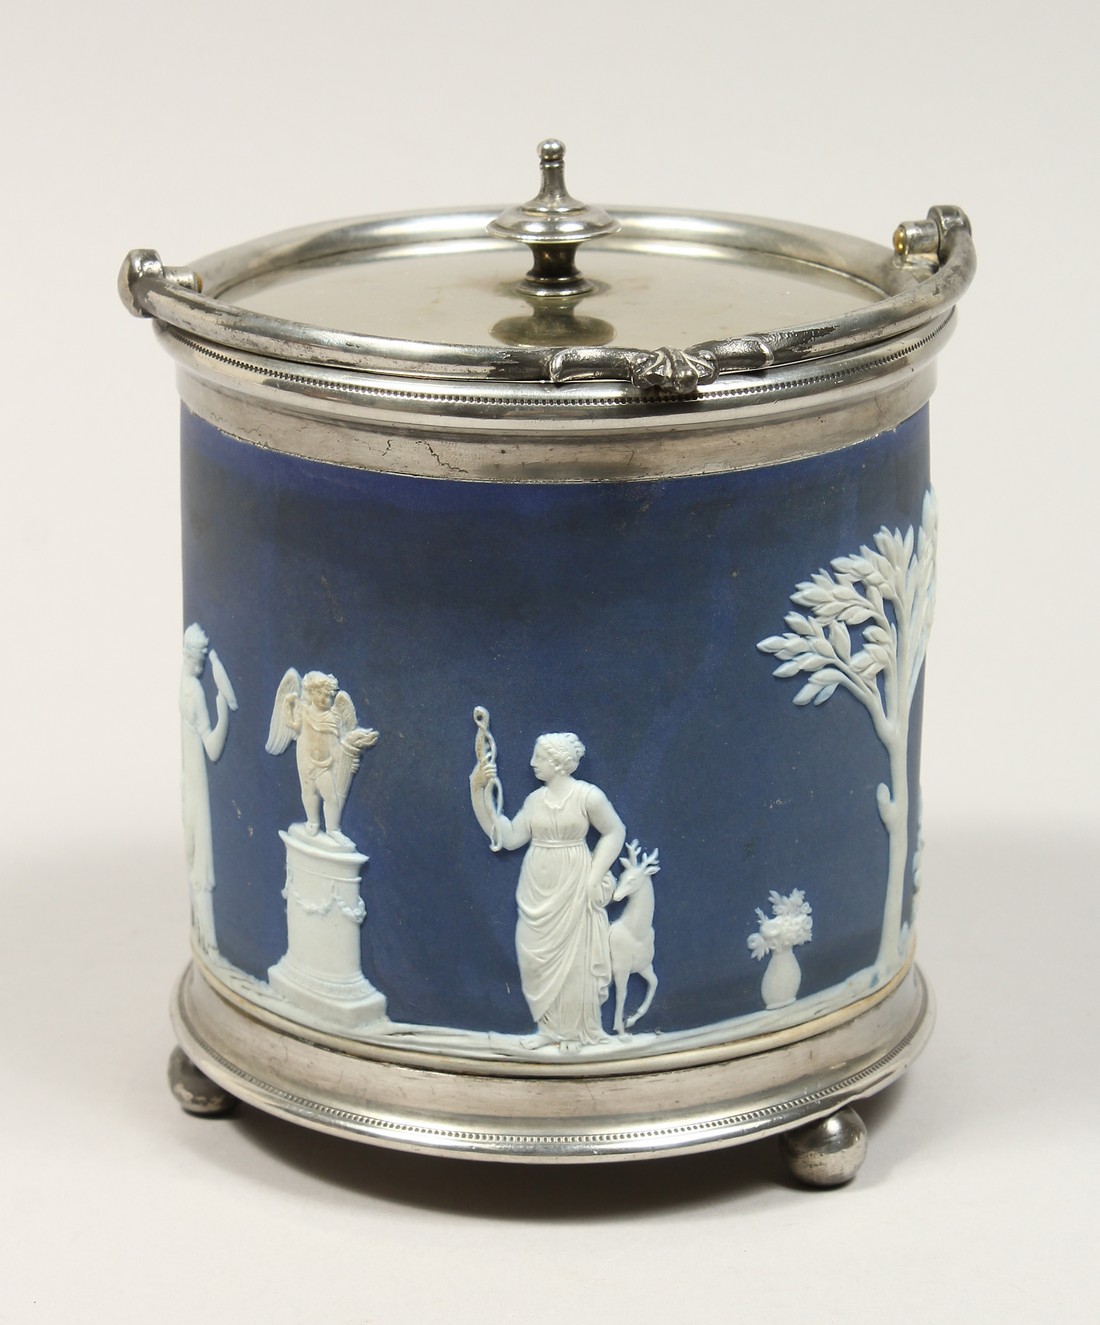 A WEDGWOOD BLUE AND WHITE JASPER WARE BISCUIT BARREL.